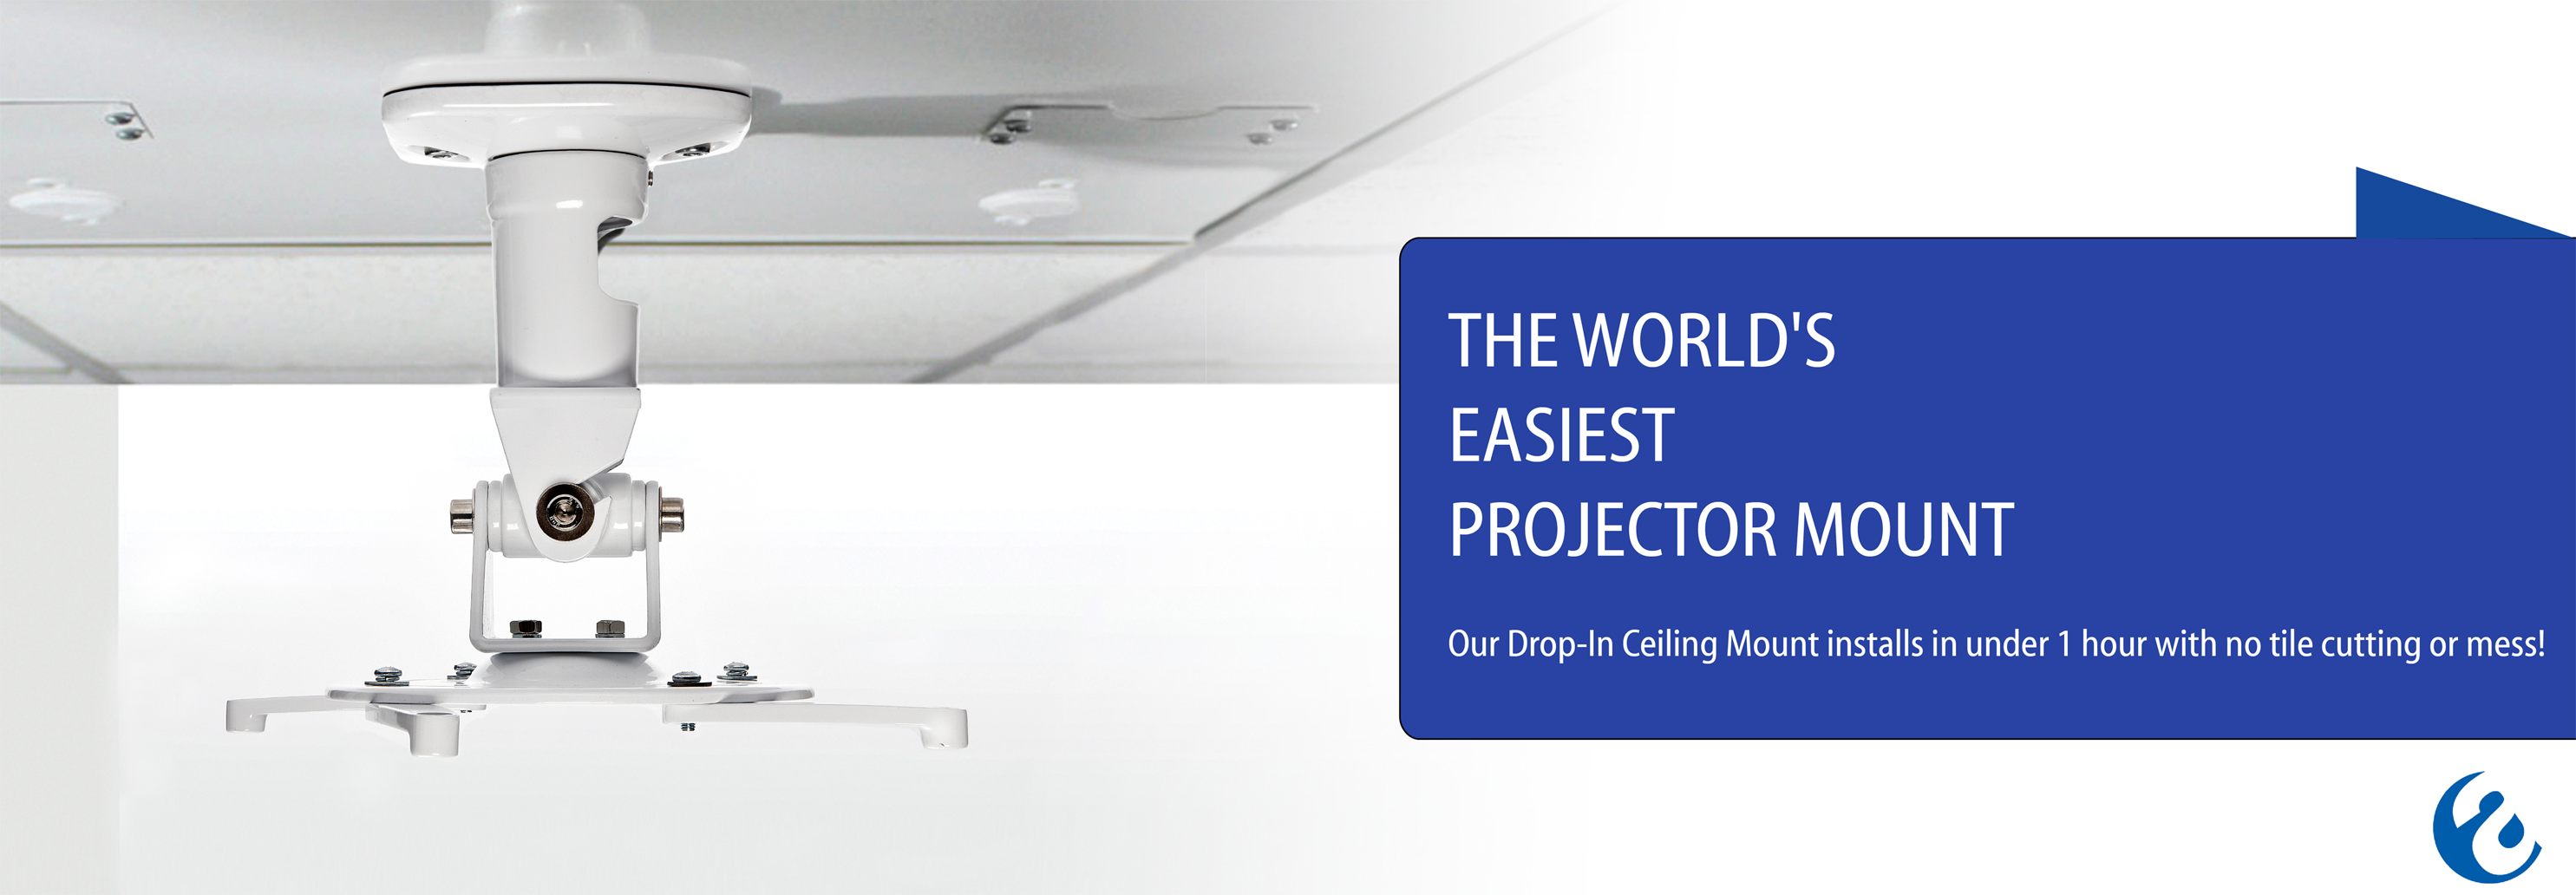 Amer Mounts Universal Drop Ceiling Projector Mount Replaces A 2 X2